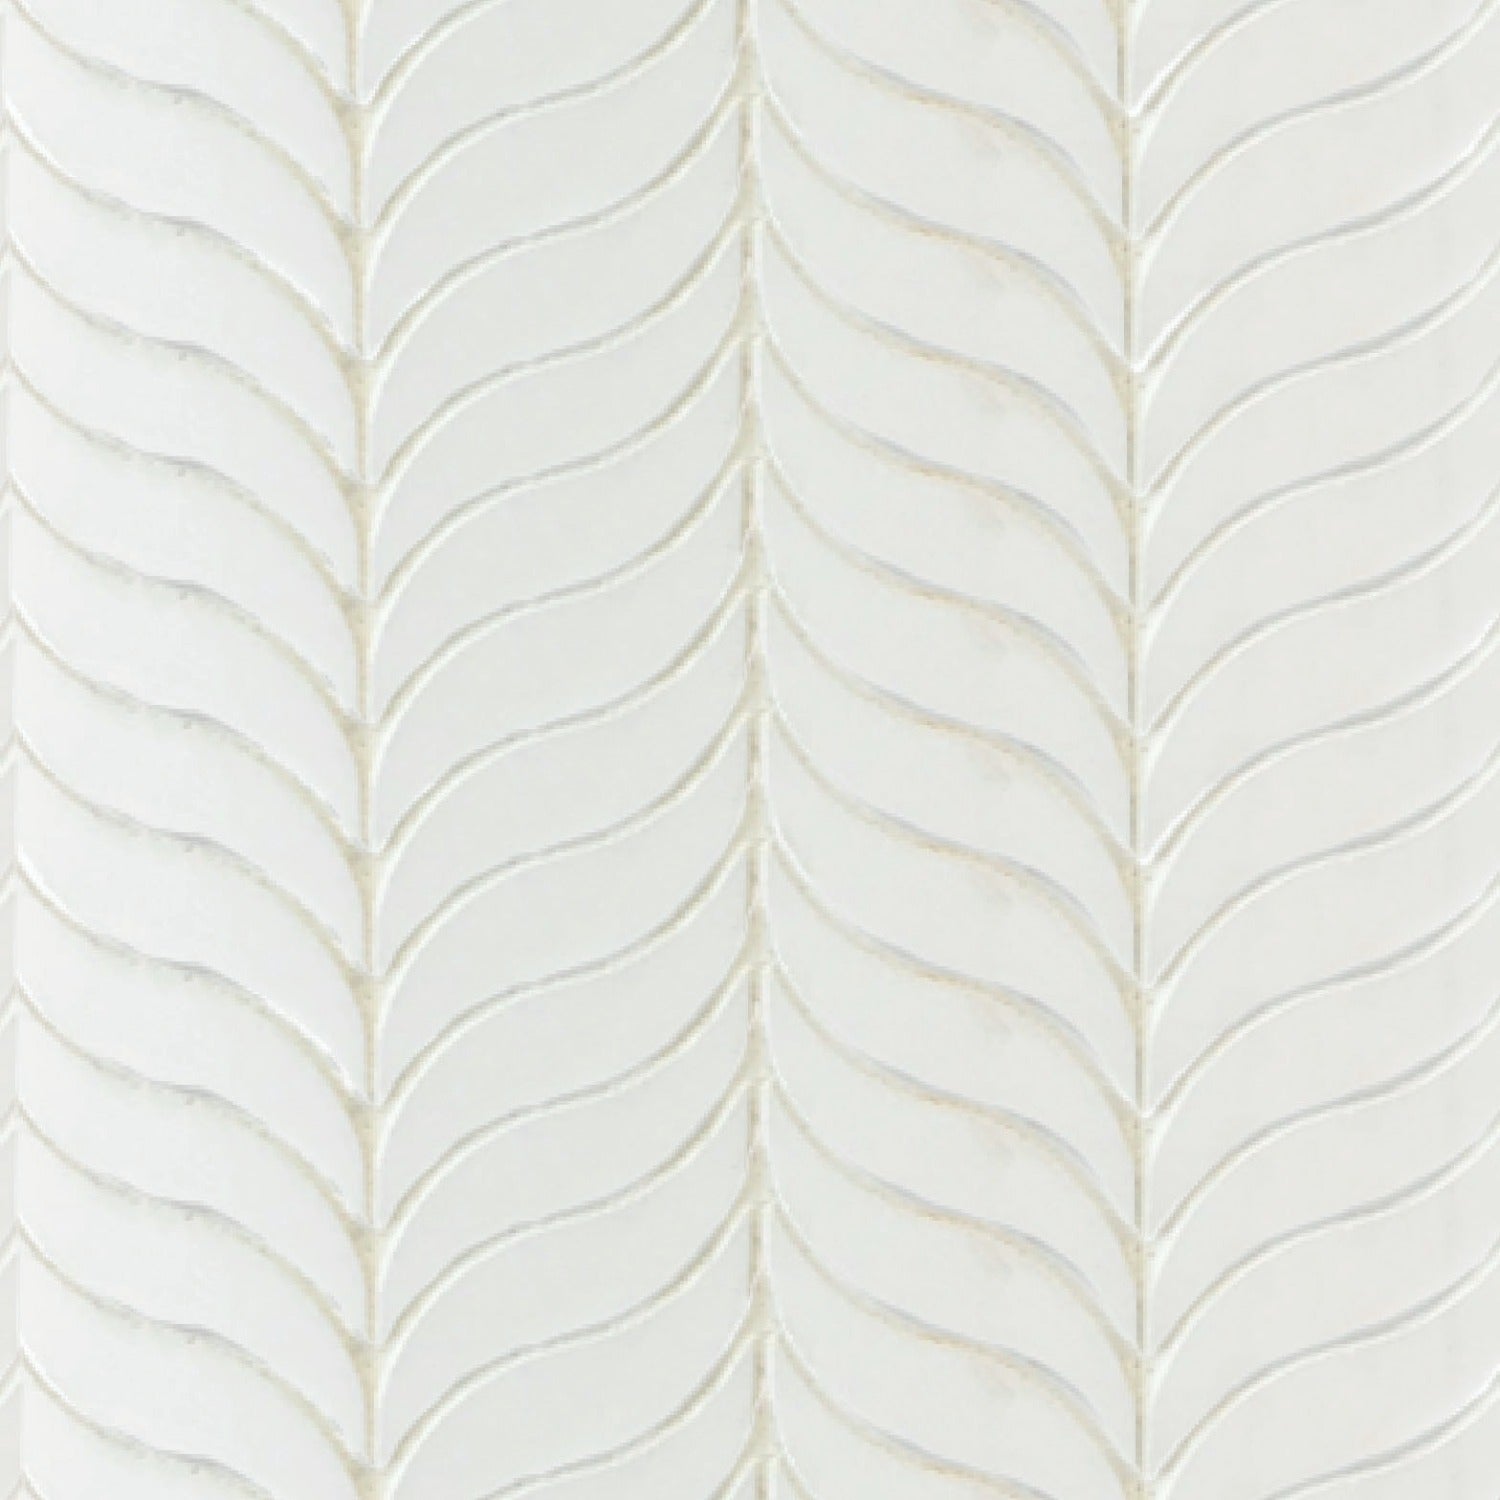 Feather Thassos Polished Waterjet Mosaic All Marble Tiles